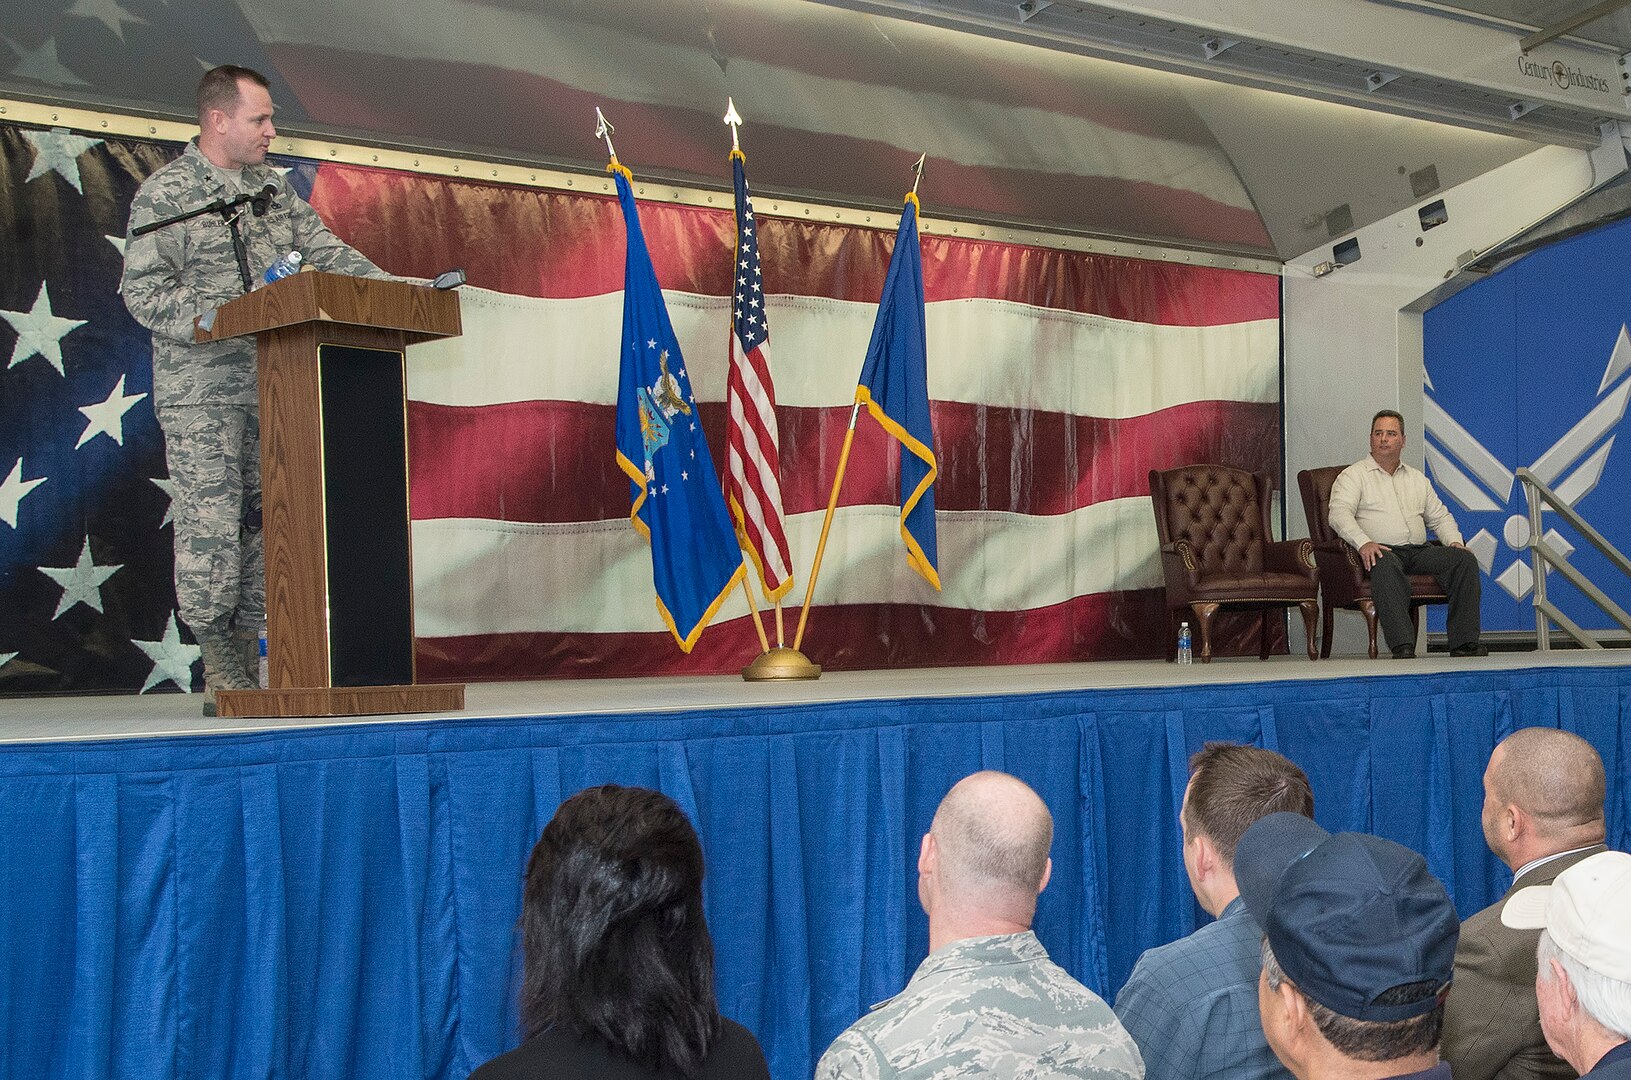 Brig. Gen. Carl Buhler, Ogden Air Logistics Complex commander, addresses the crowd during a 575th Aircraft Maintenance Squadron activation ceremony Dec. 11 at Joint Base San Antonio-Randolph. The 575th AMXS is a geographically separate unit assigned to the 309th Aircraft Maintenance Group, Ogden Air Logistics Complex Hill Air Force Base, Utah. The squadron is responsible for depot level maintenance, restoration and modification of over 500 T-38 Talon aircraft for the United States Air Force and Navy. (U.S. Air Force photo by Johnny Saldivar)